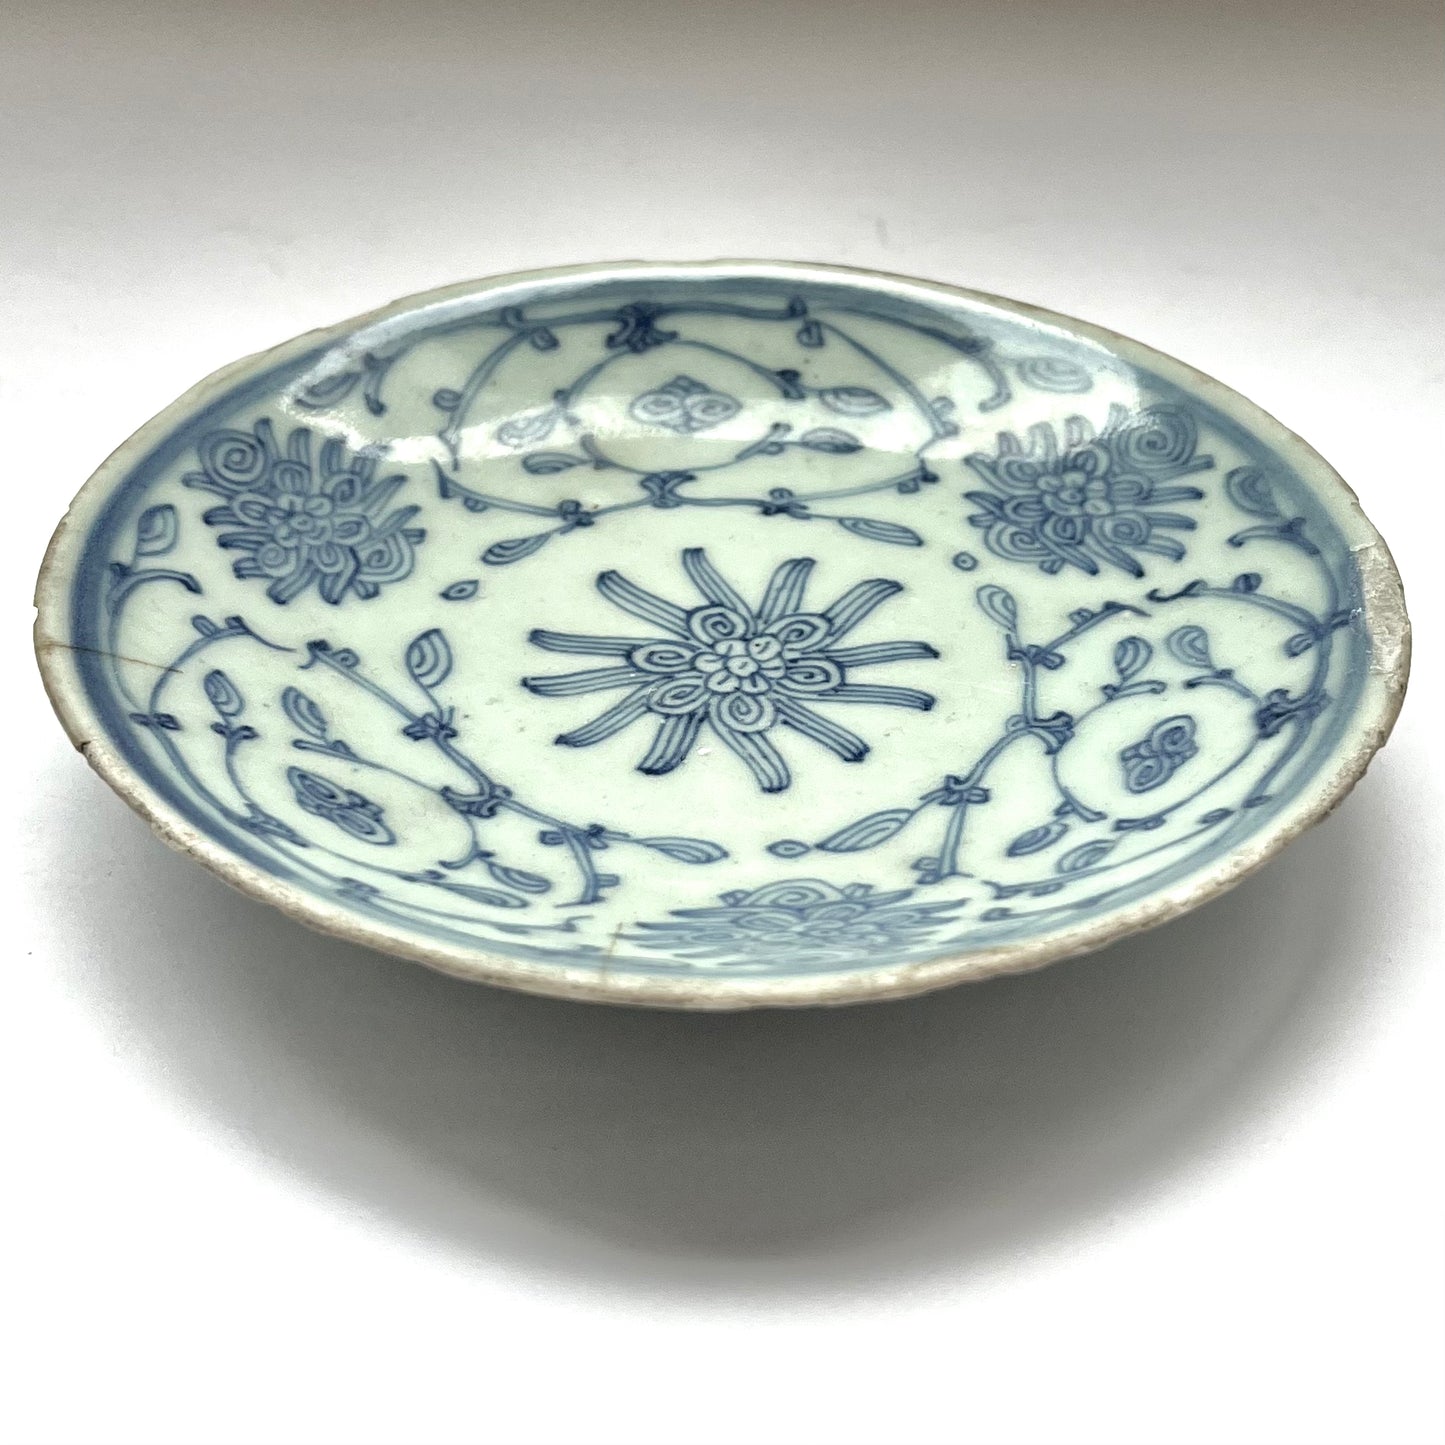 Antique Swatow Plate, Southeast Asian circa 1800s